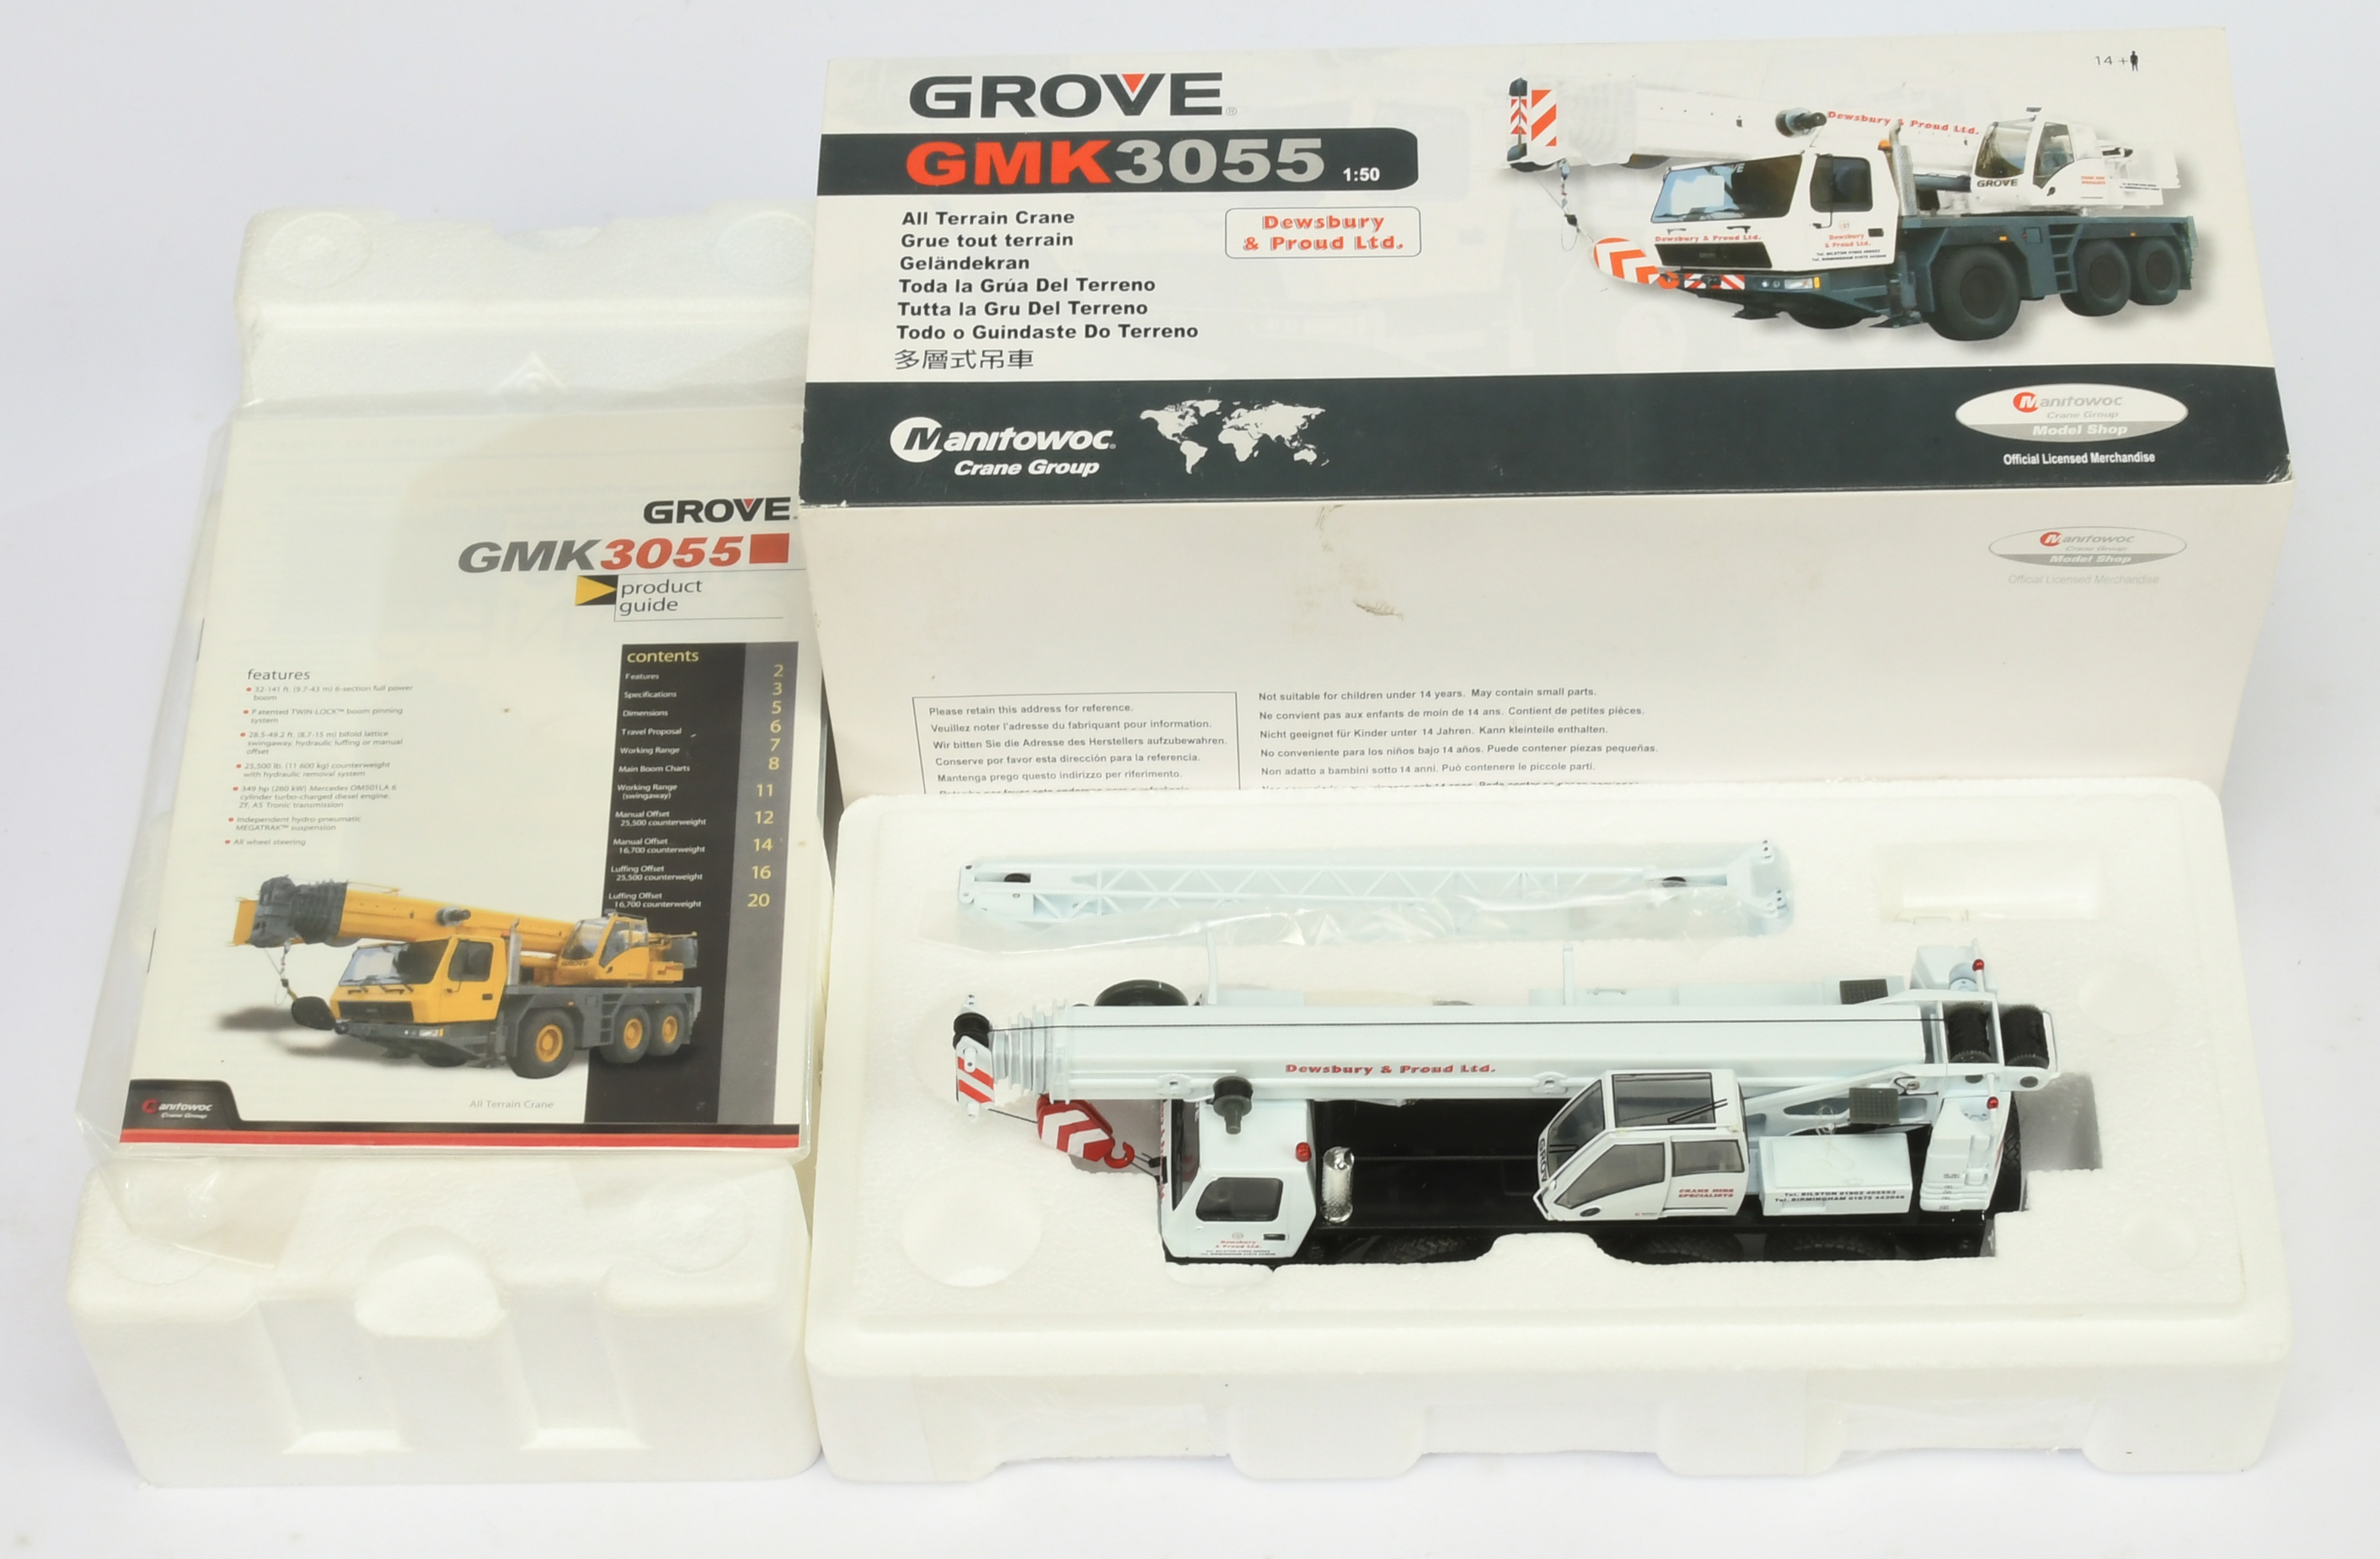 TWH Collectables  (1/50th) 01046  Grove GMK 3055   Mobile Crane - White and black  - Near Mint   ...